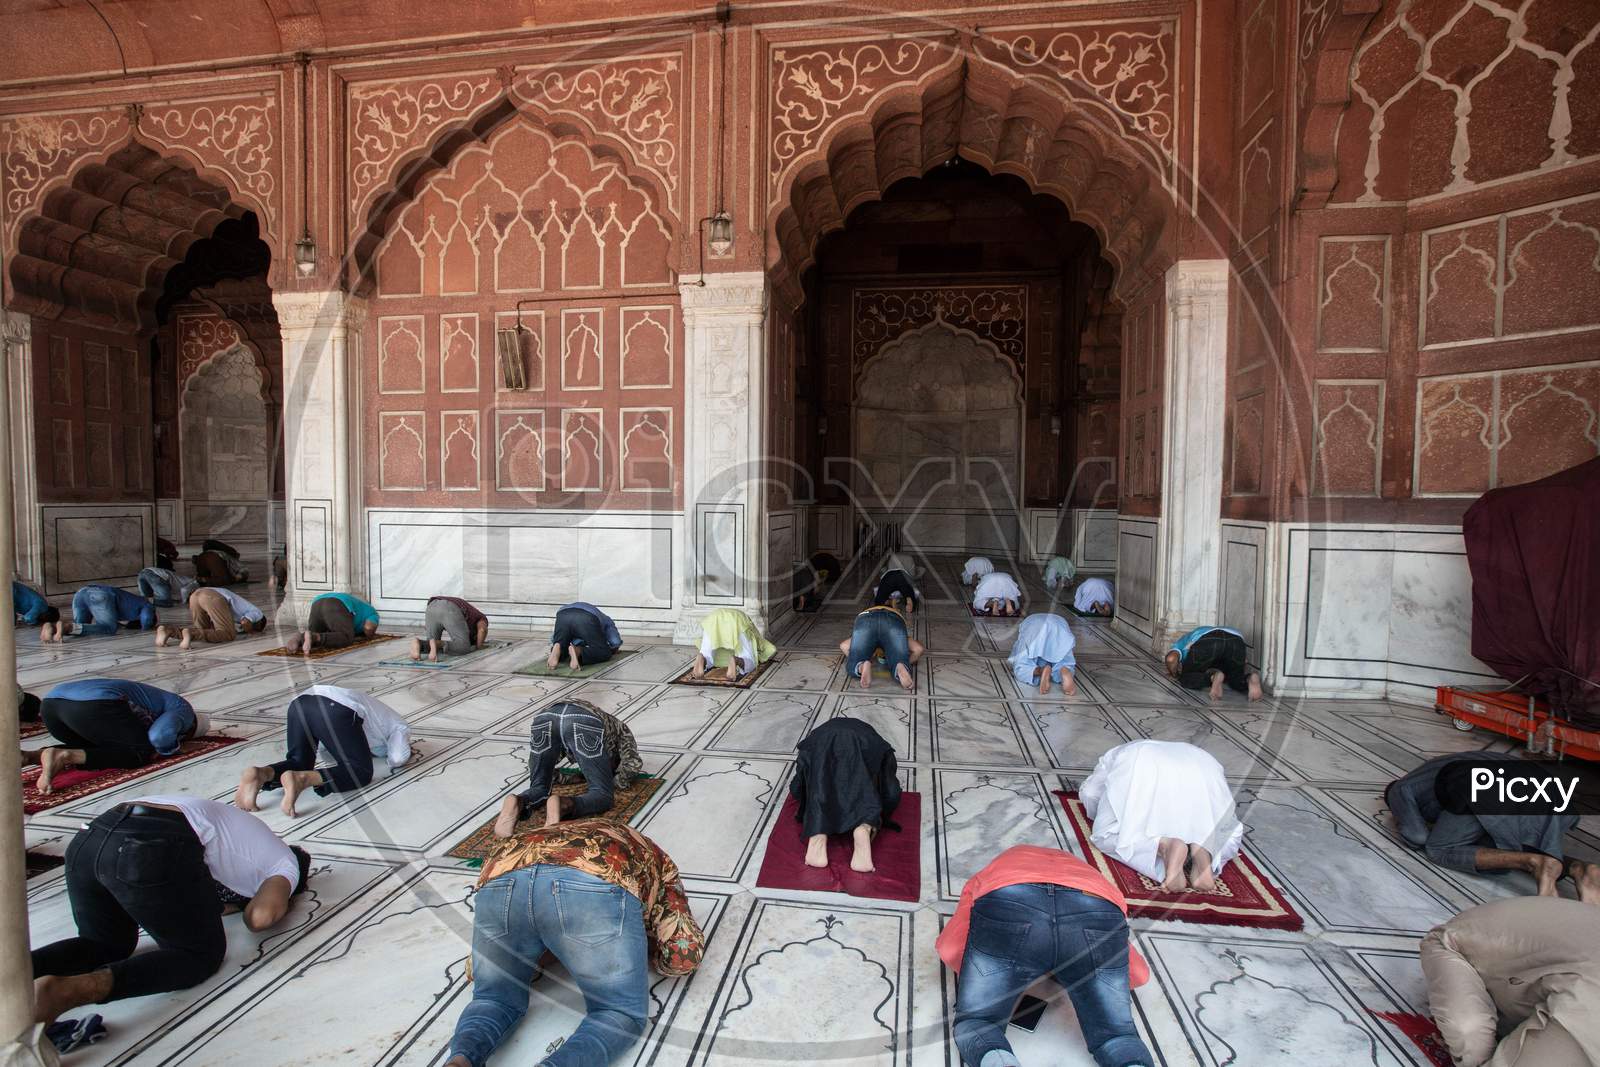 Muslims offers prayer Inside Jama Masjid After The Opening Of Most Of The Religious Places As India Eases Lockdown Restrictions That Were Imposed To Slow The Spread Of The Coronavirus Disease (Covid-19), In The Old Quarters Of Delhi, India, June 8, 2020.